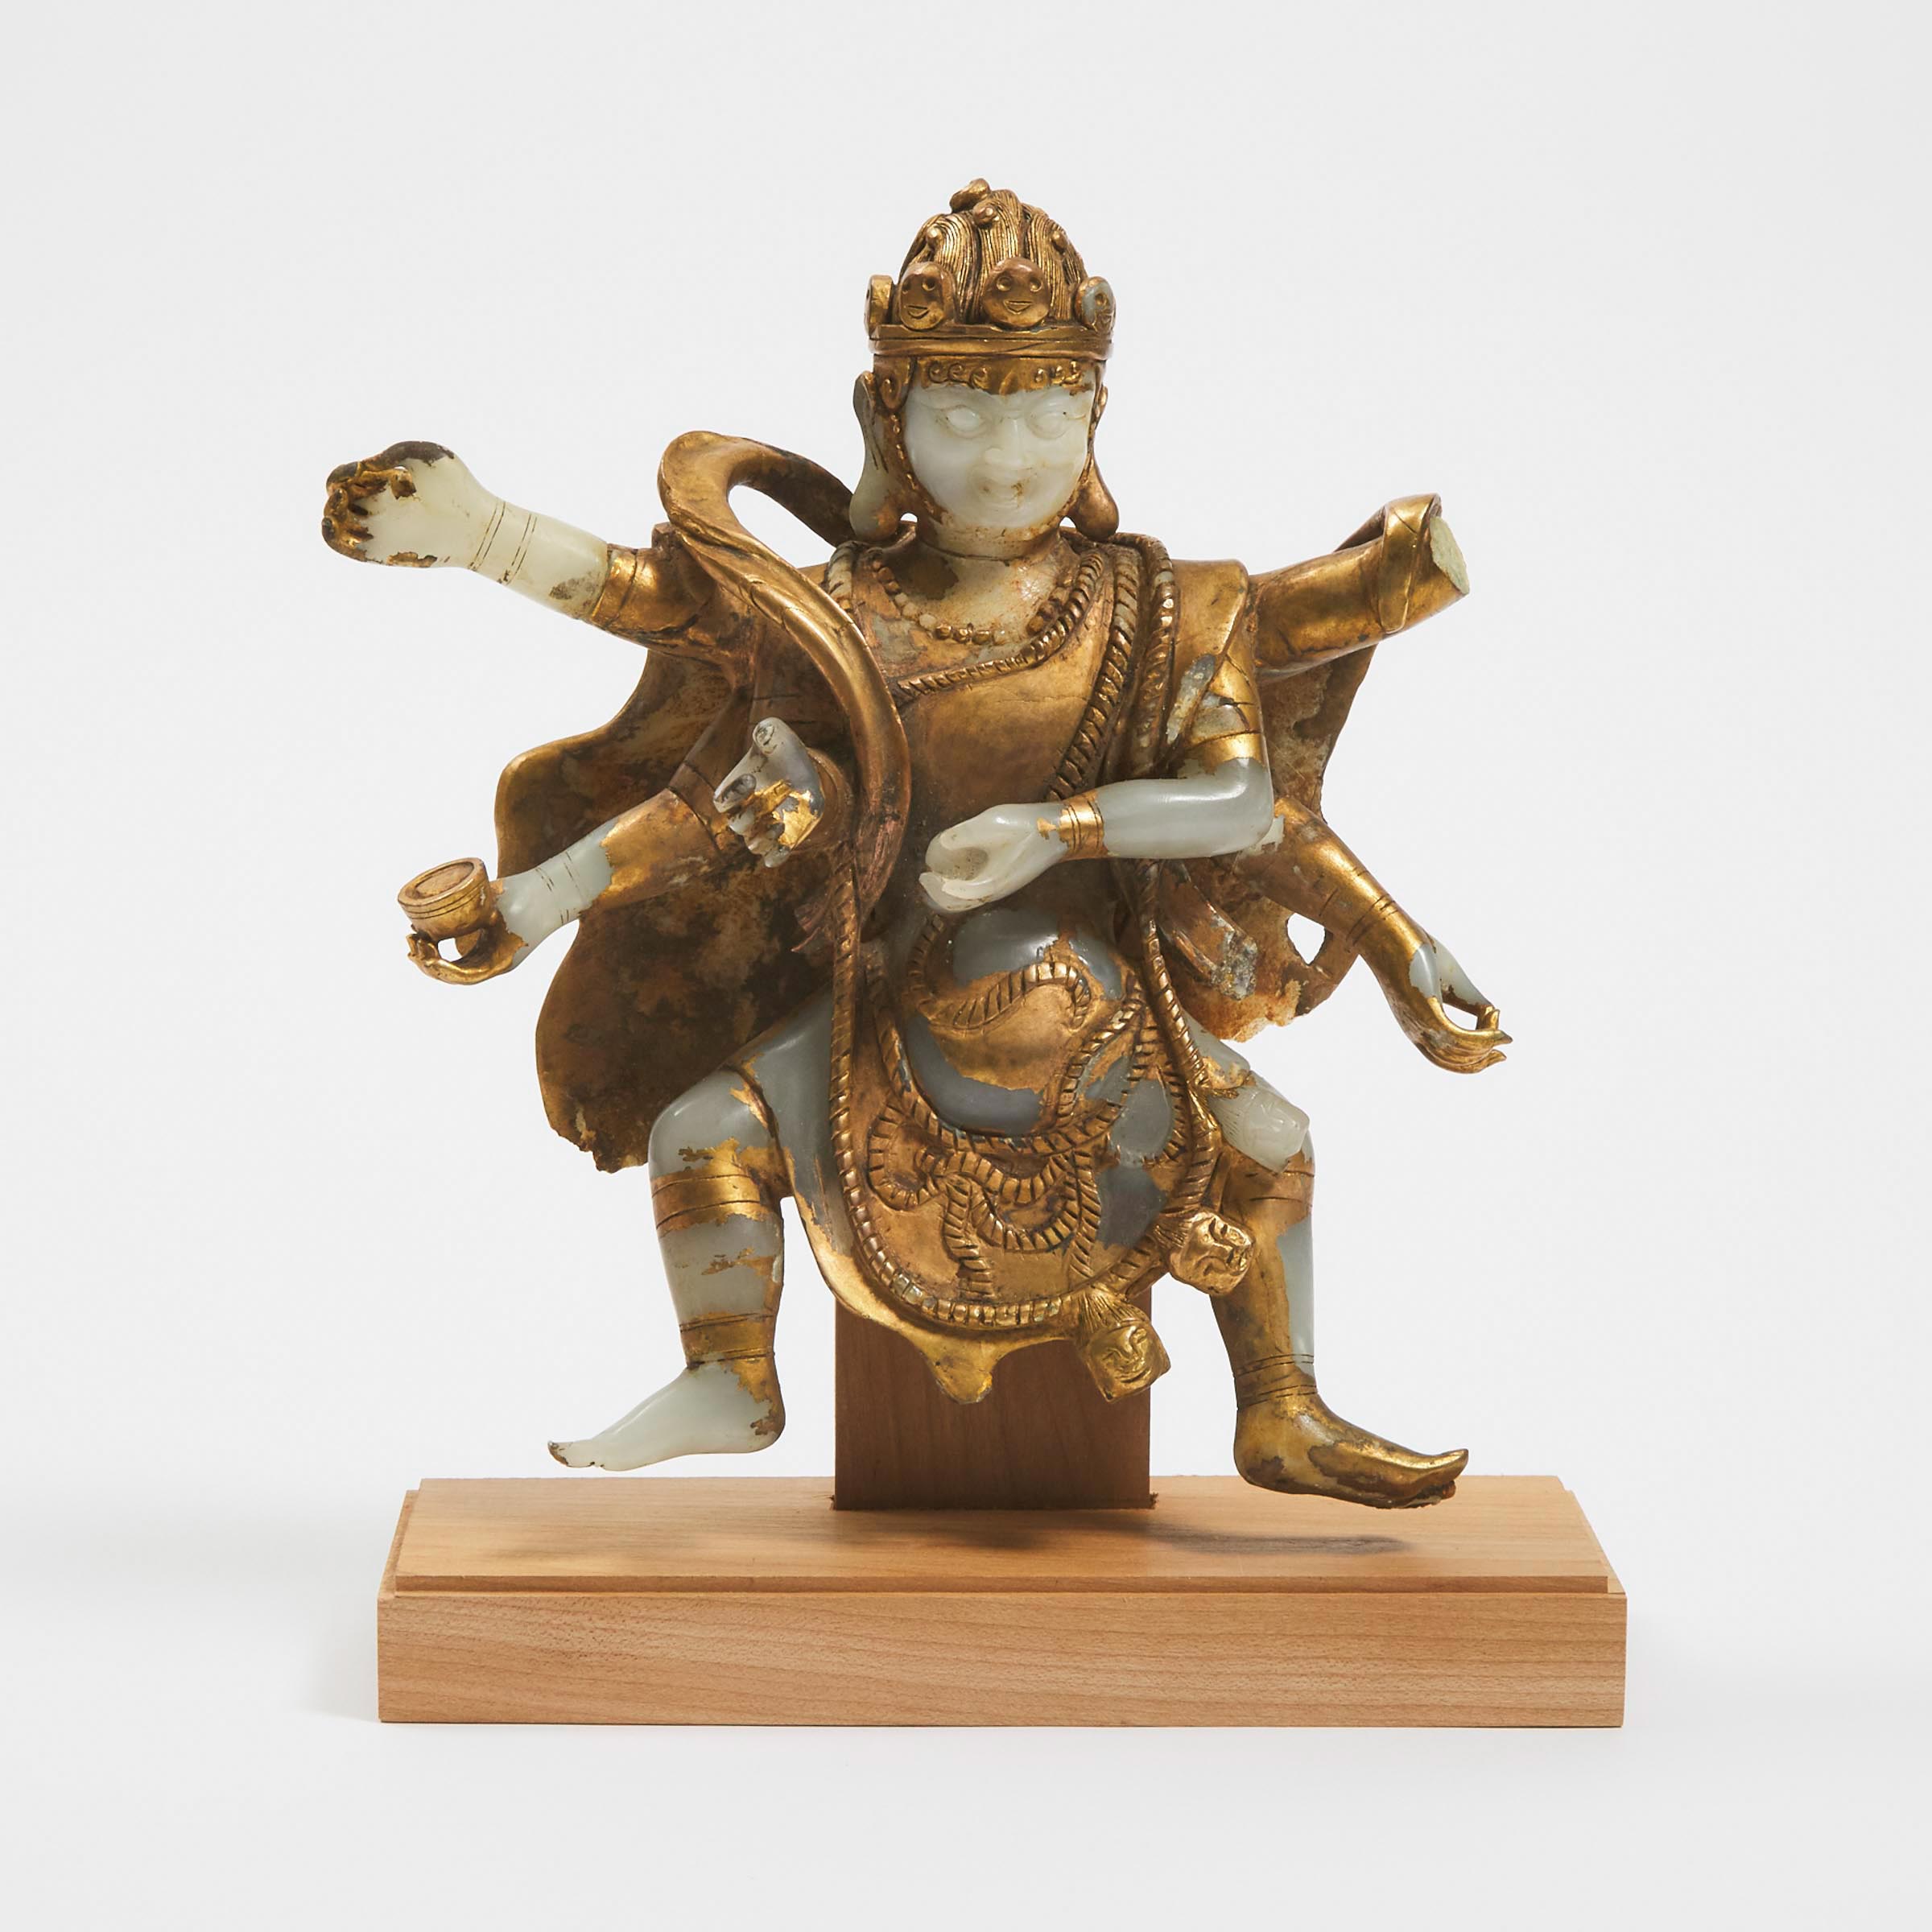 A Gilt-Decorated Jade Figure of a Tantric Deity, 18th Century or Later